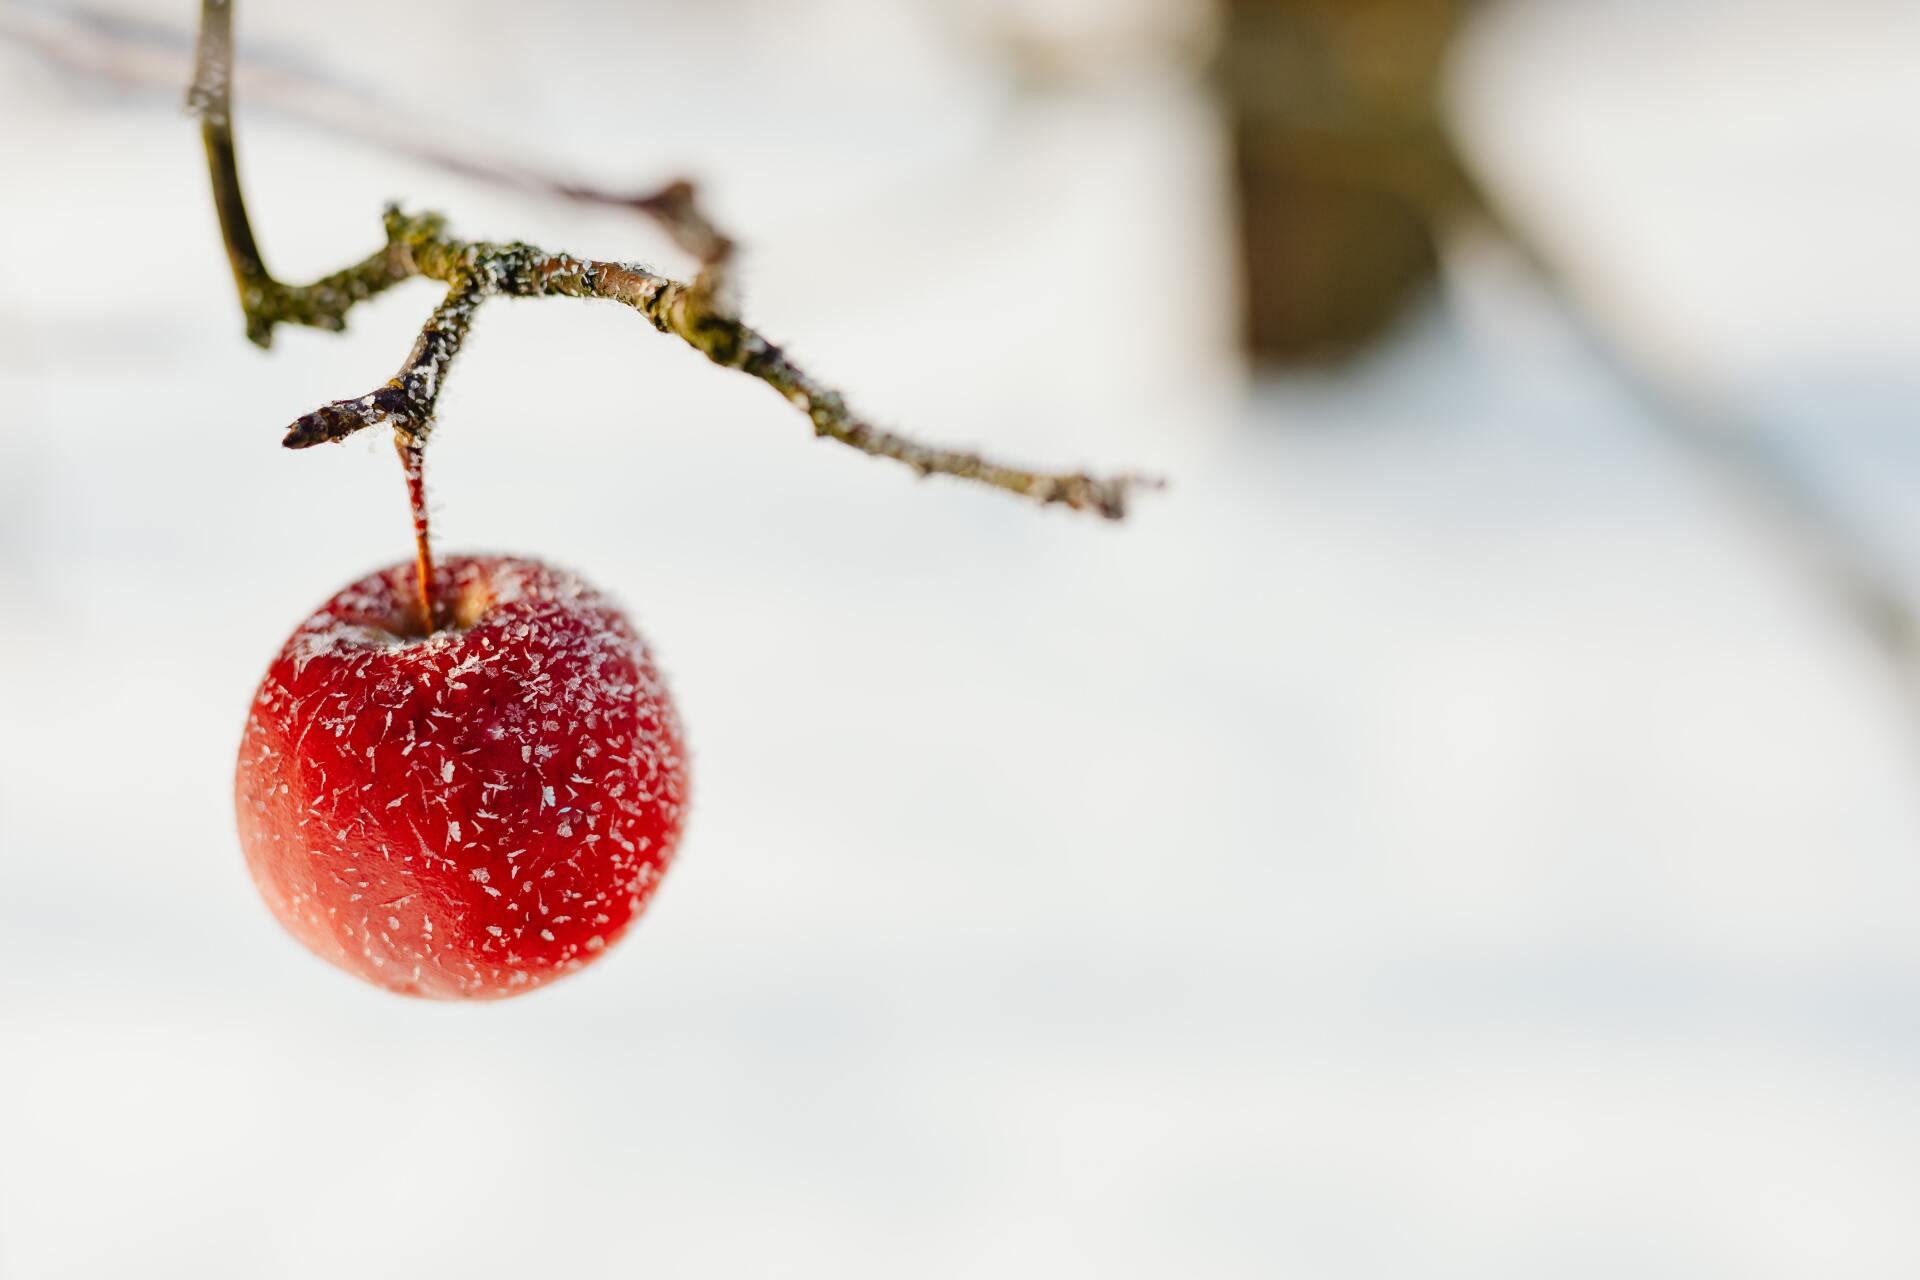 Snow-covered red fruit still on the branch